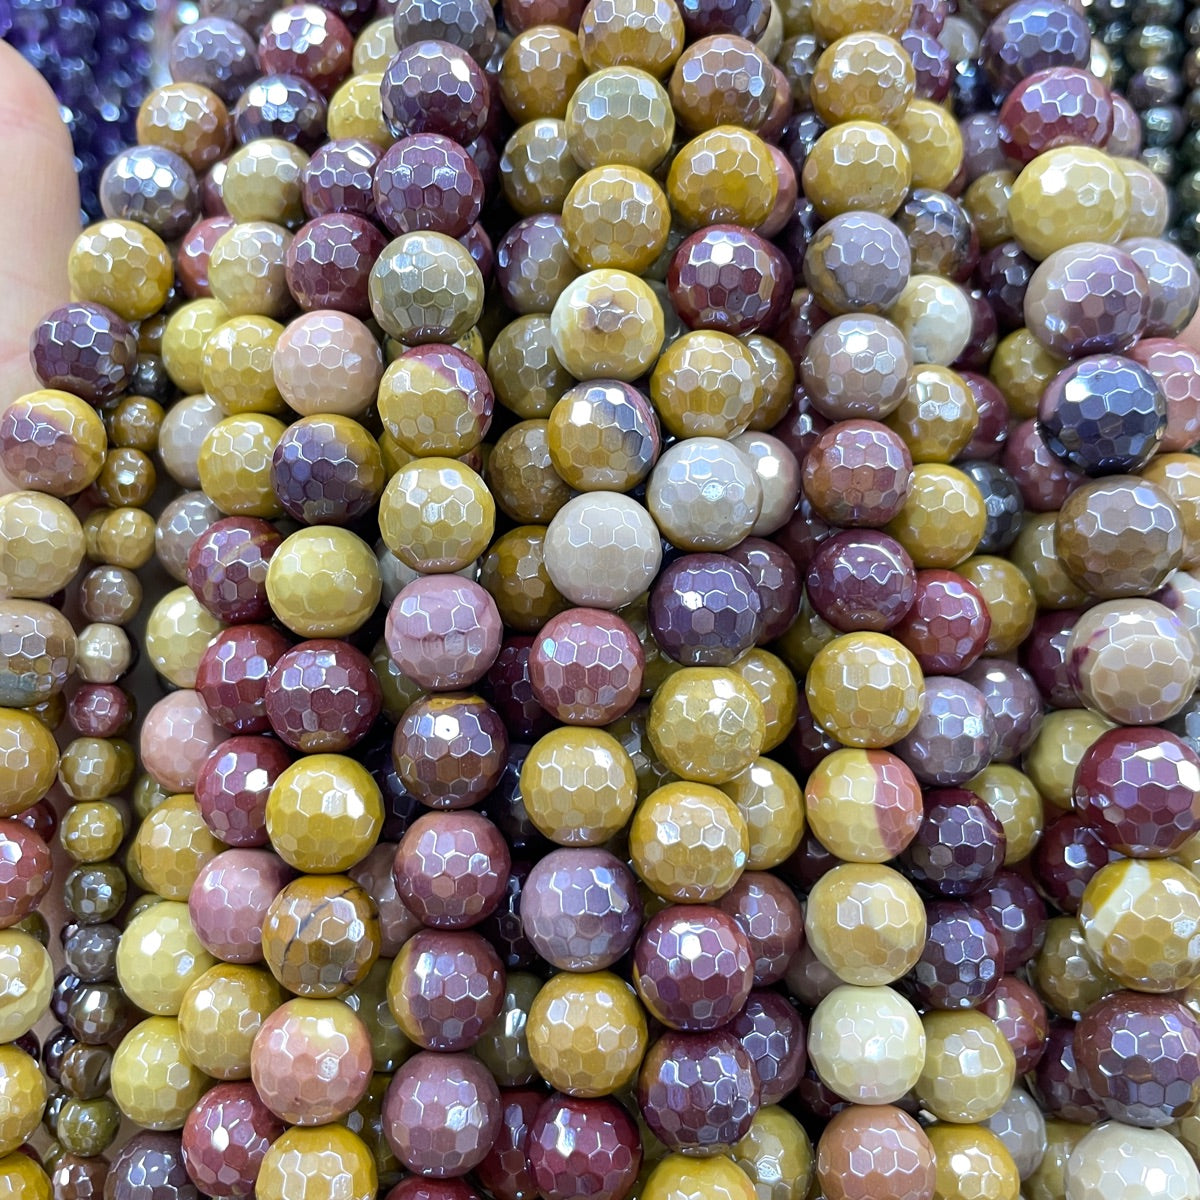 10mm Electroplated Mookaite Jasper Faceted Beads--Grade A Premium Quality Electroplated Beads New Beads Arrivals Premium Quality Agate Beads Charms Beads Beyond